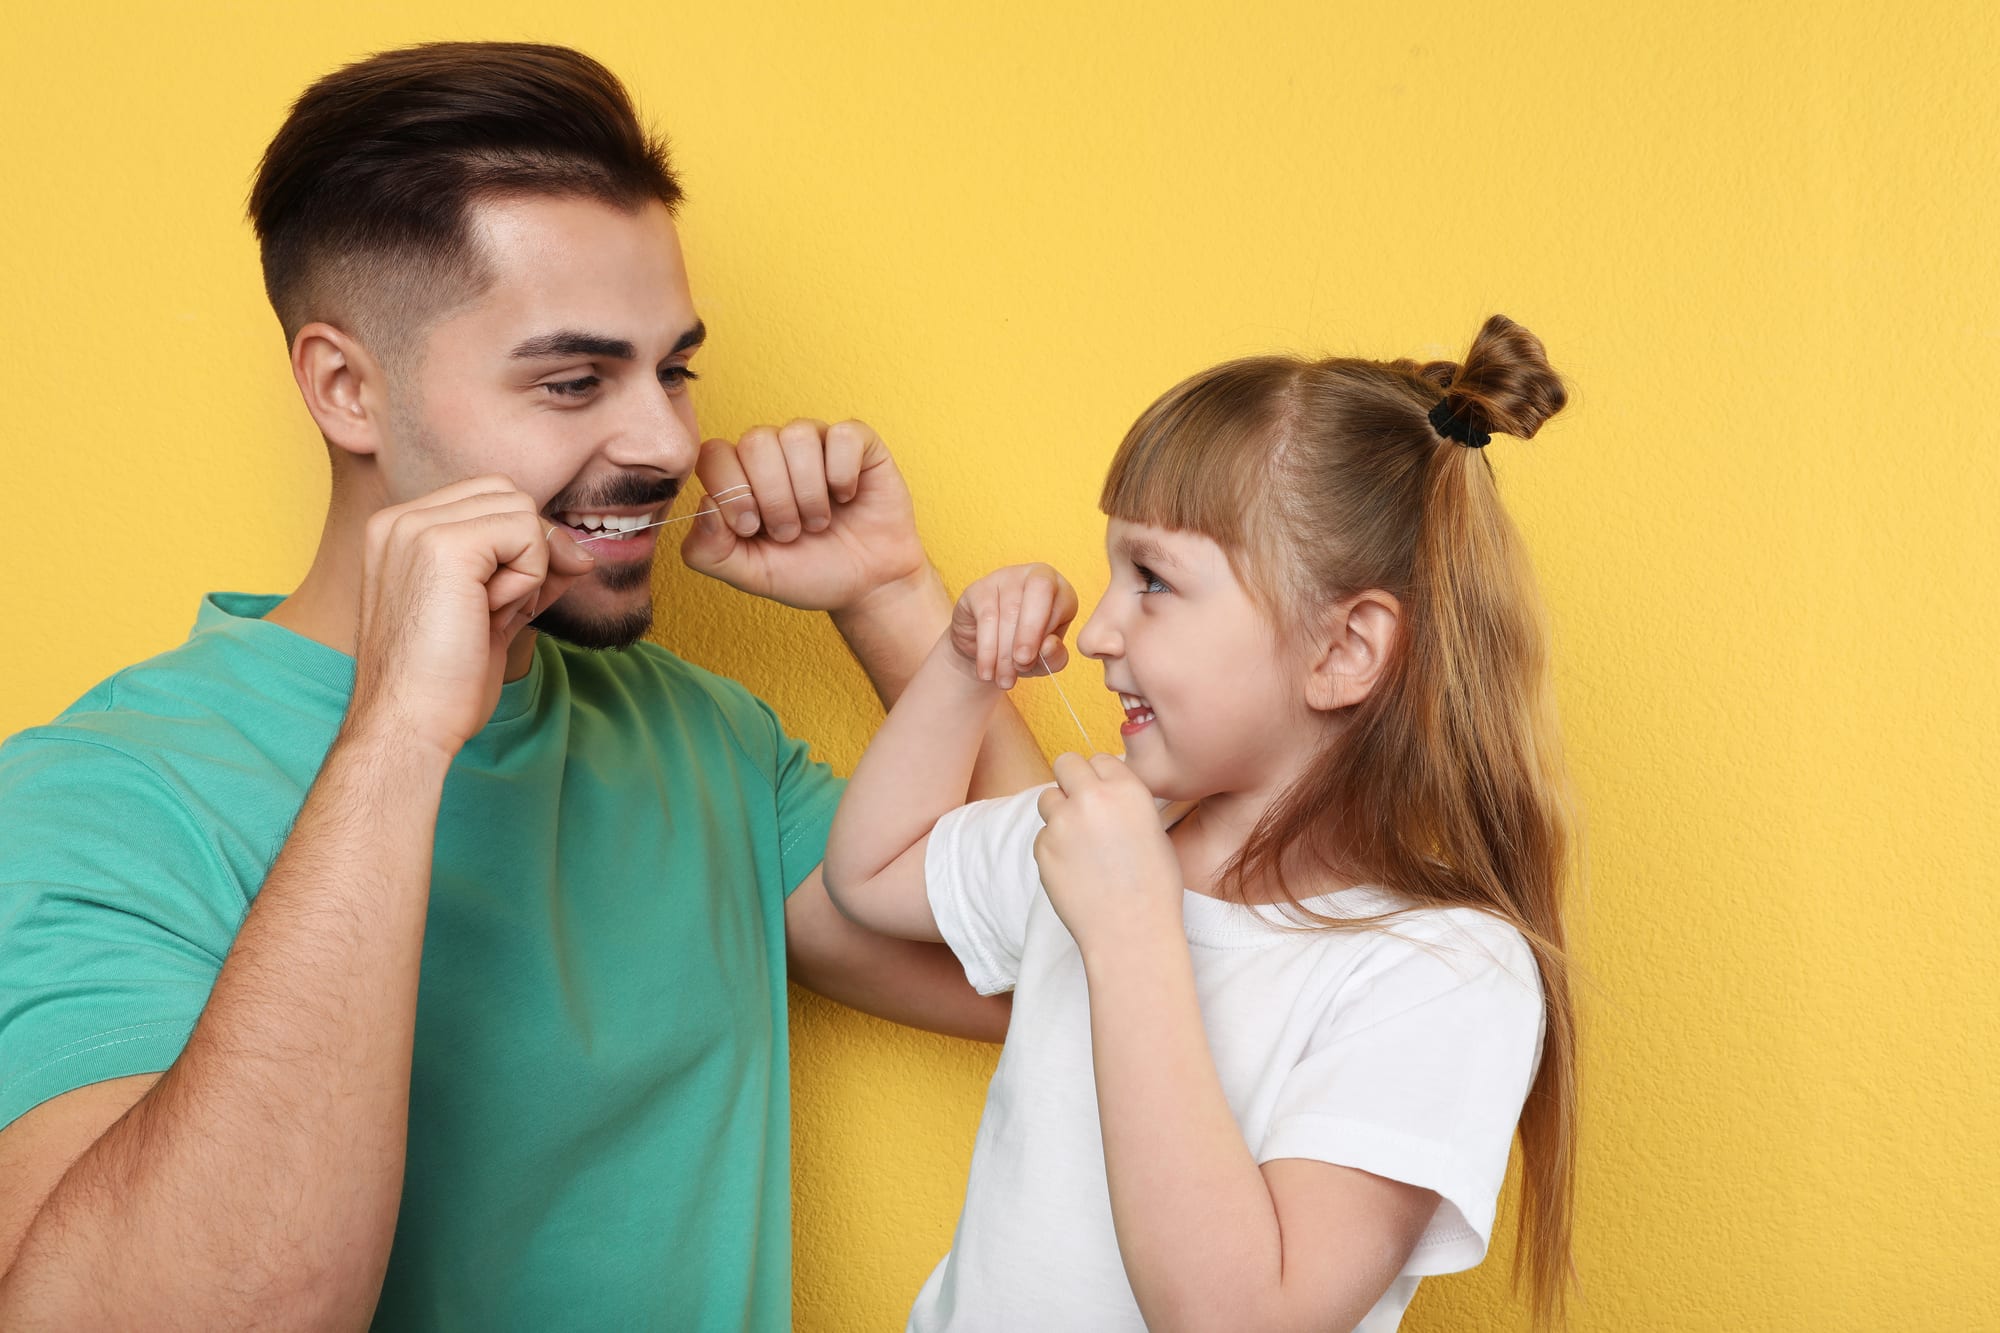 Dental Care Tips for Parents: Teaching Kids to Floss